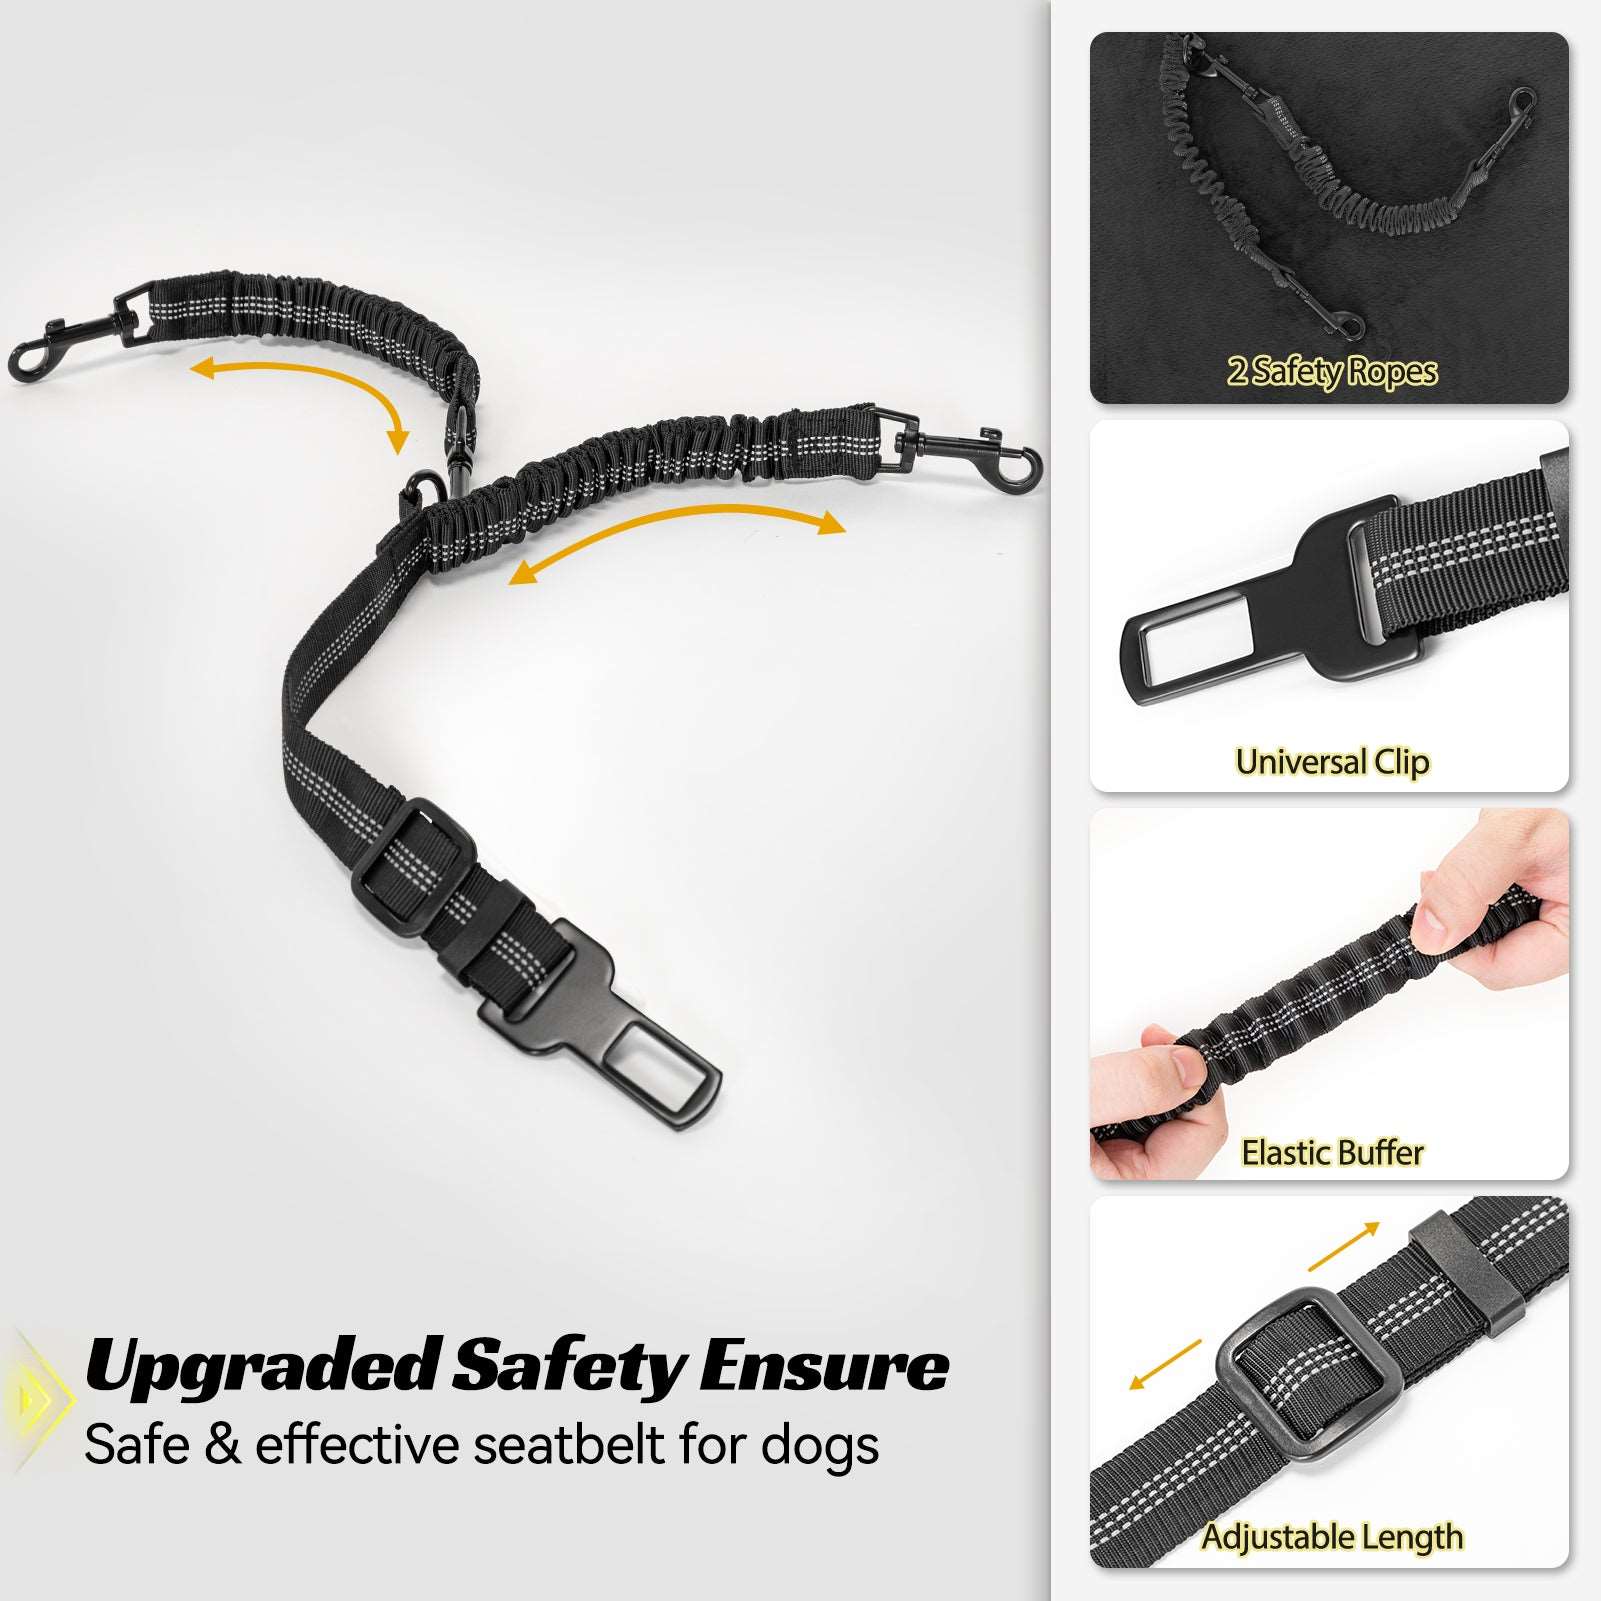 petsfit-dog-booster-car-seat-dog-car-seat-for-medium-dogs-with-2-clip-on-safety-leashes-08